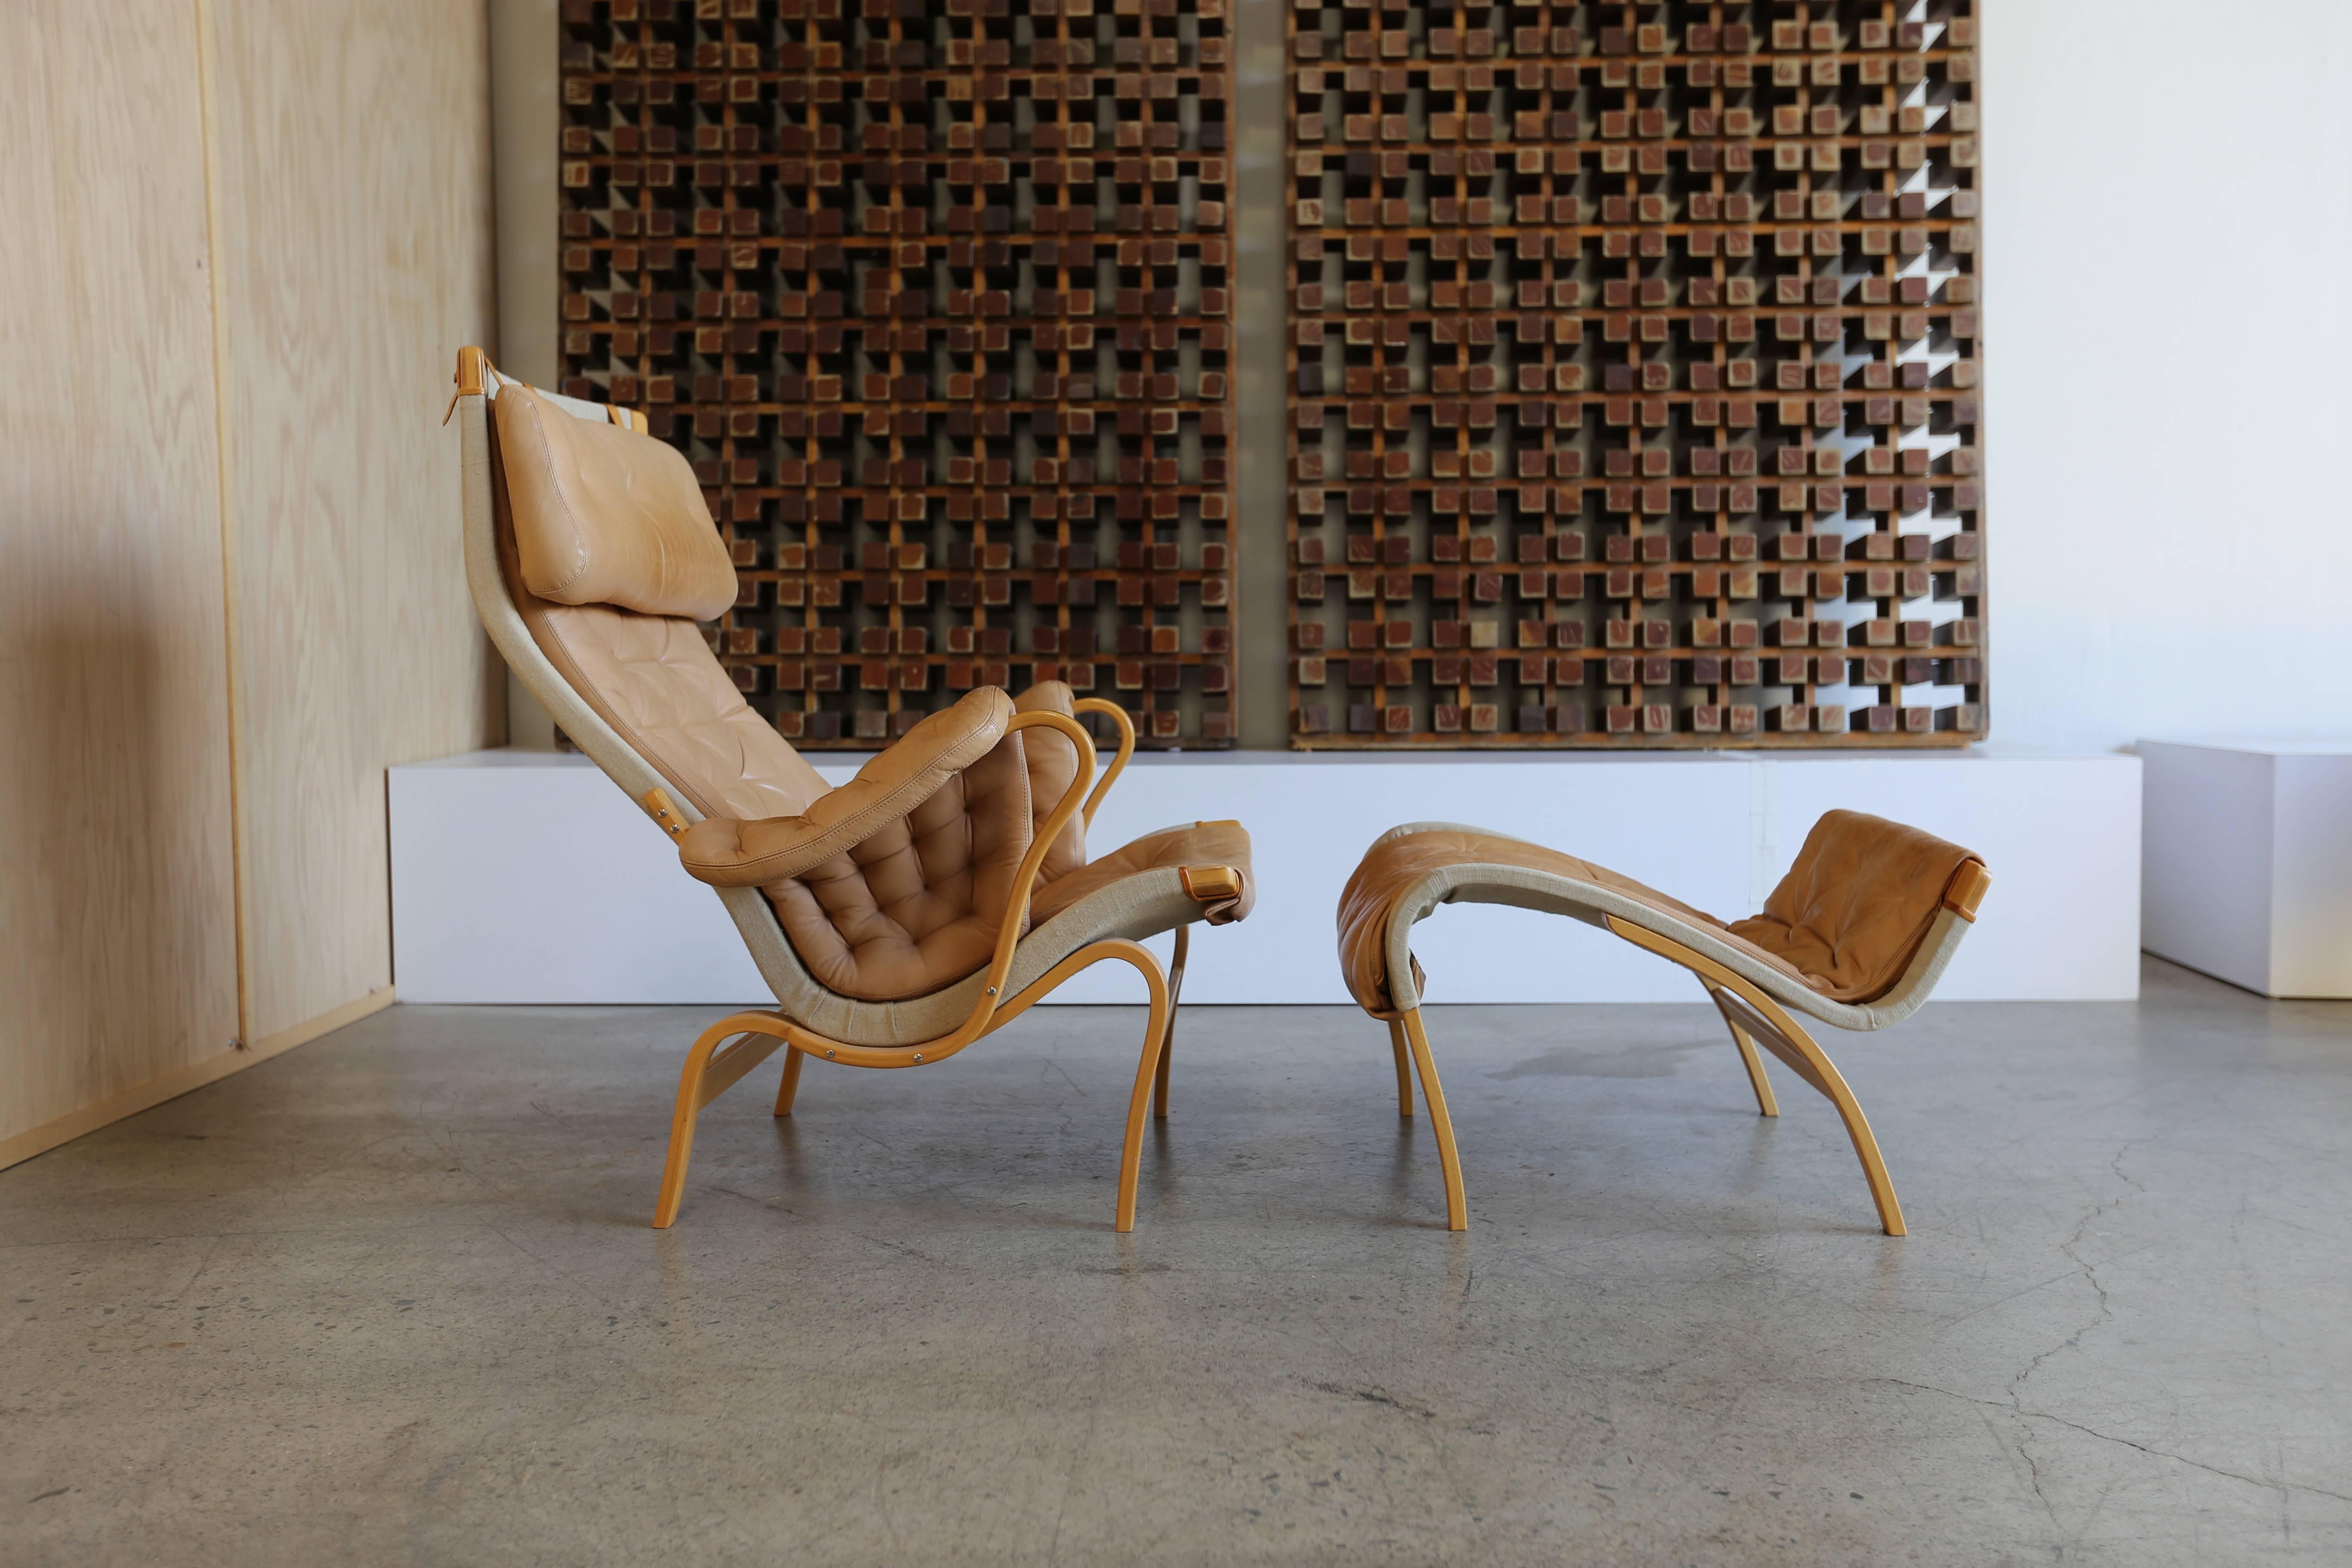 Pernilla lounge chair with ottoman by Bruno Mathsson.

The ottoman measures: 24.25 wide x 16